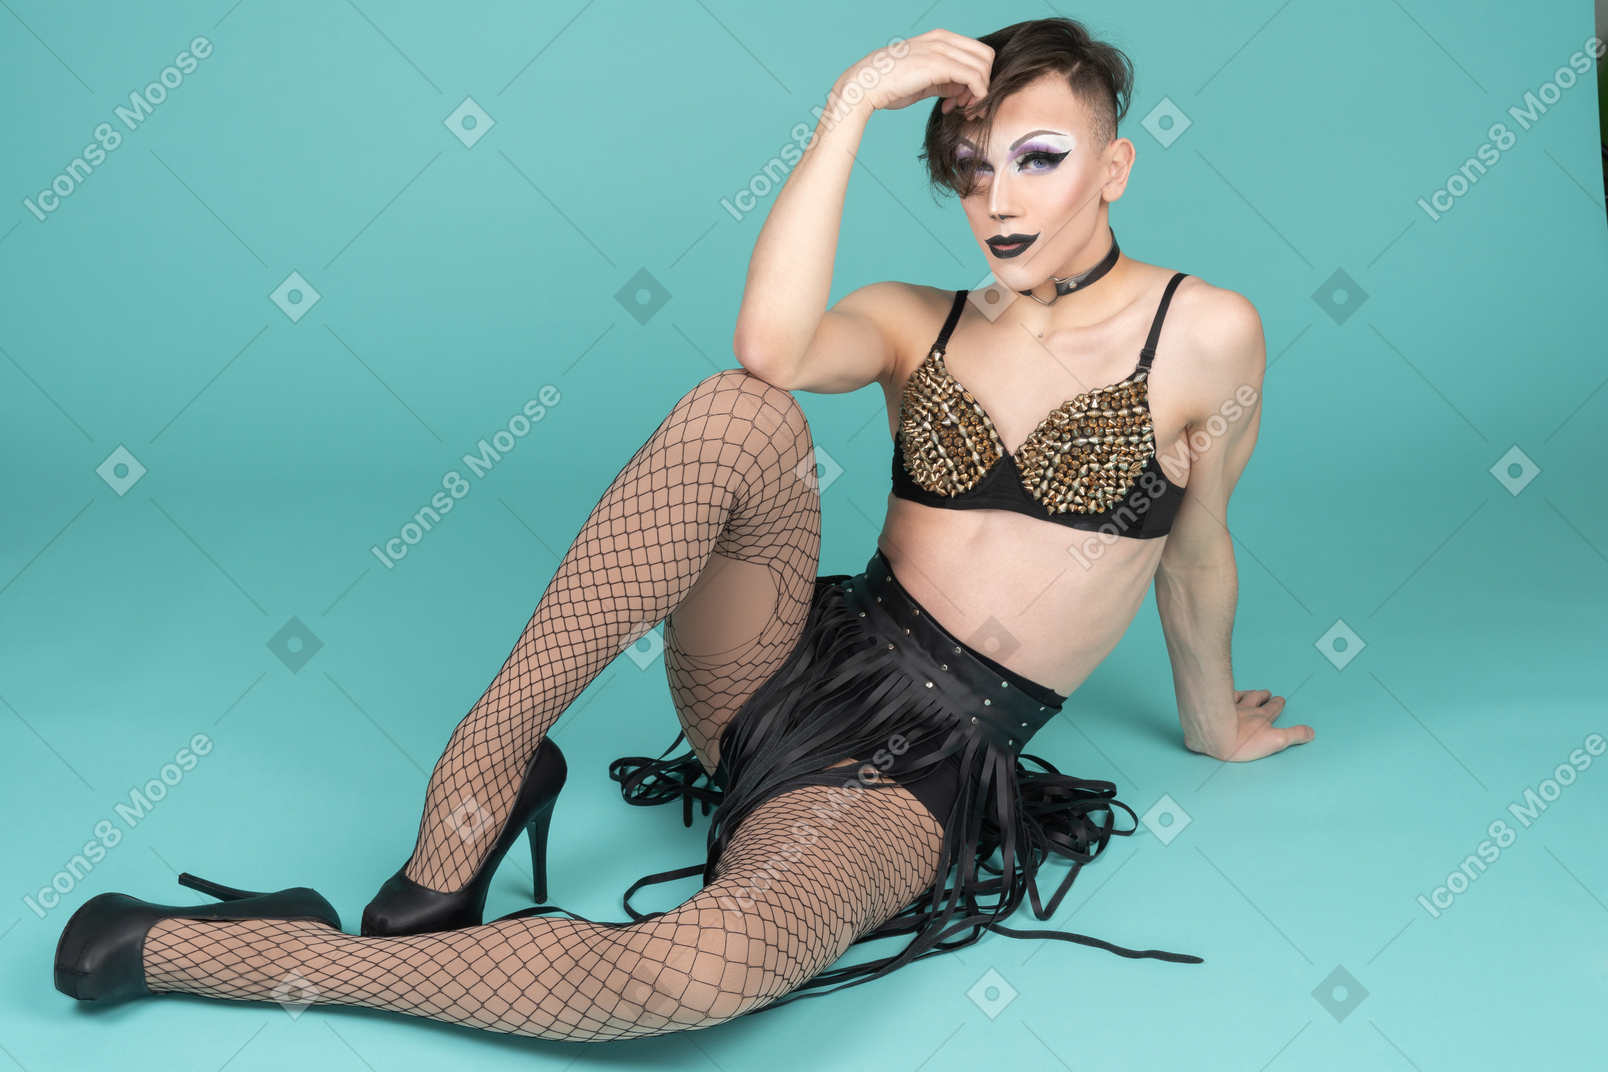 Full length portrait of a drag queen in all black outfit